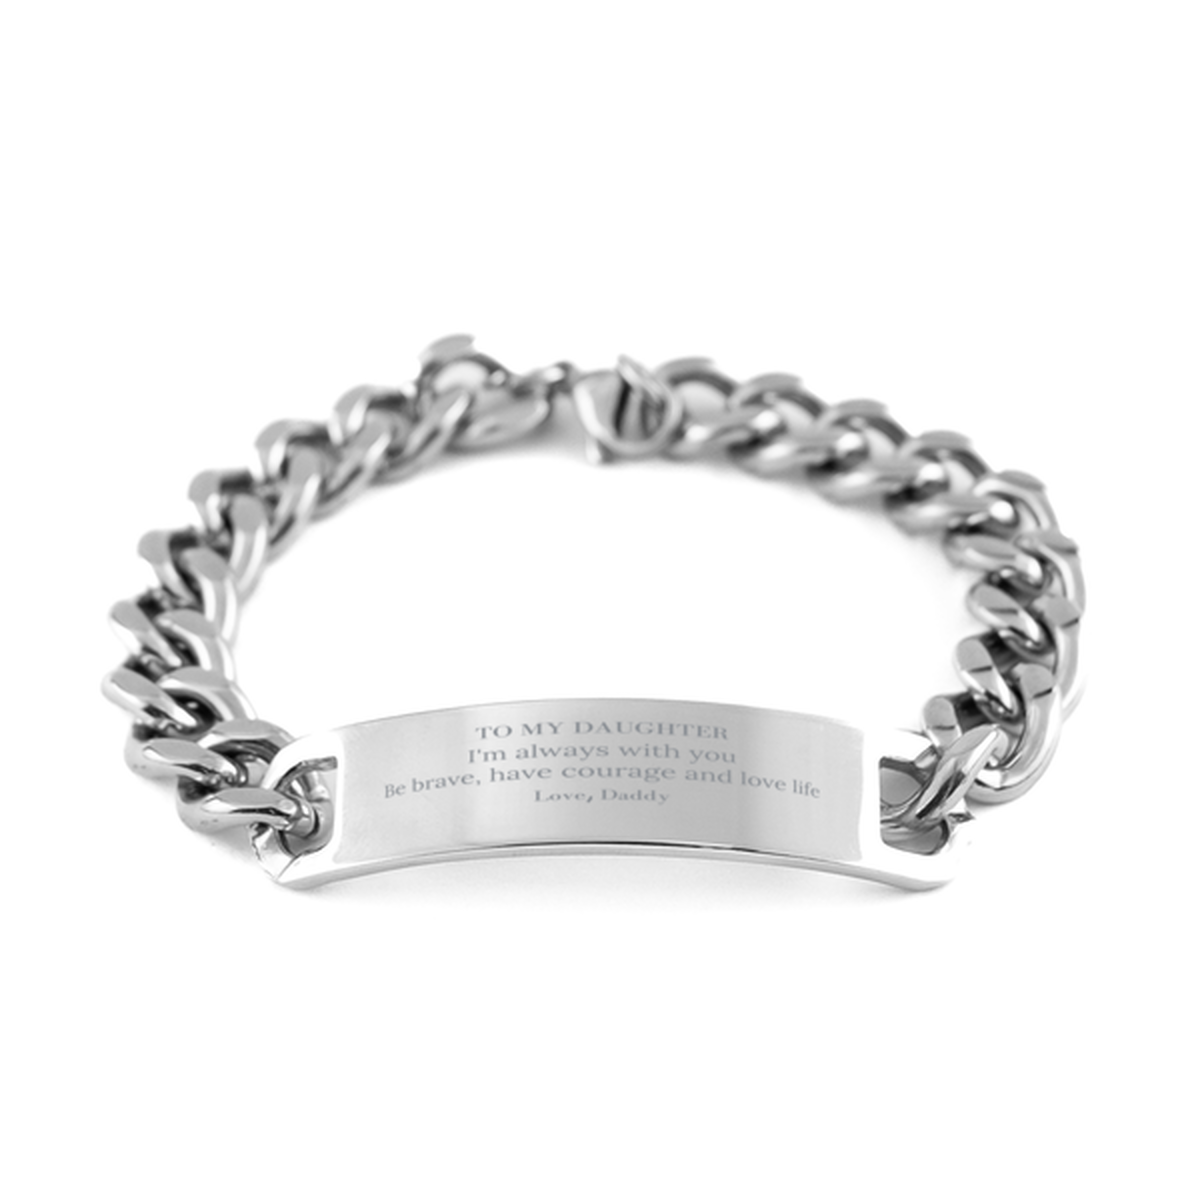 To My Daughter Gifts from Daddy, Unique Cuban Chain Stainless Steel Bracelet Inspirational Christmas Birthday Graduation Gifts for Daughter I'm always with you. Be brave, have courage and love life. Love, Daddy